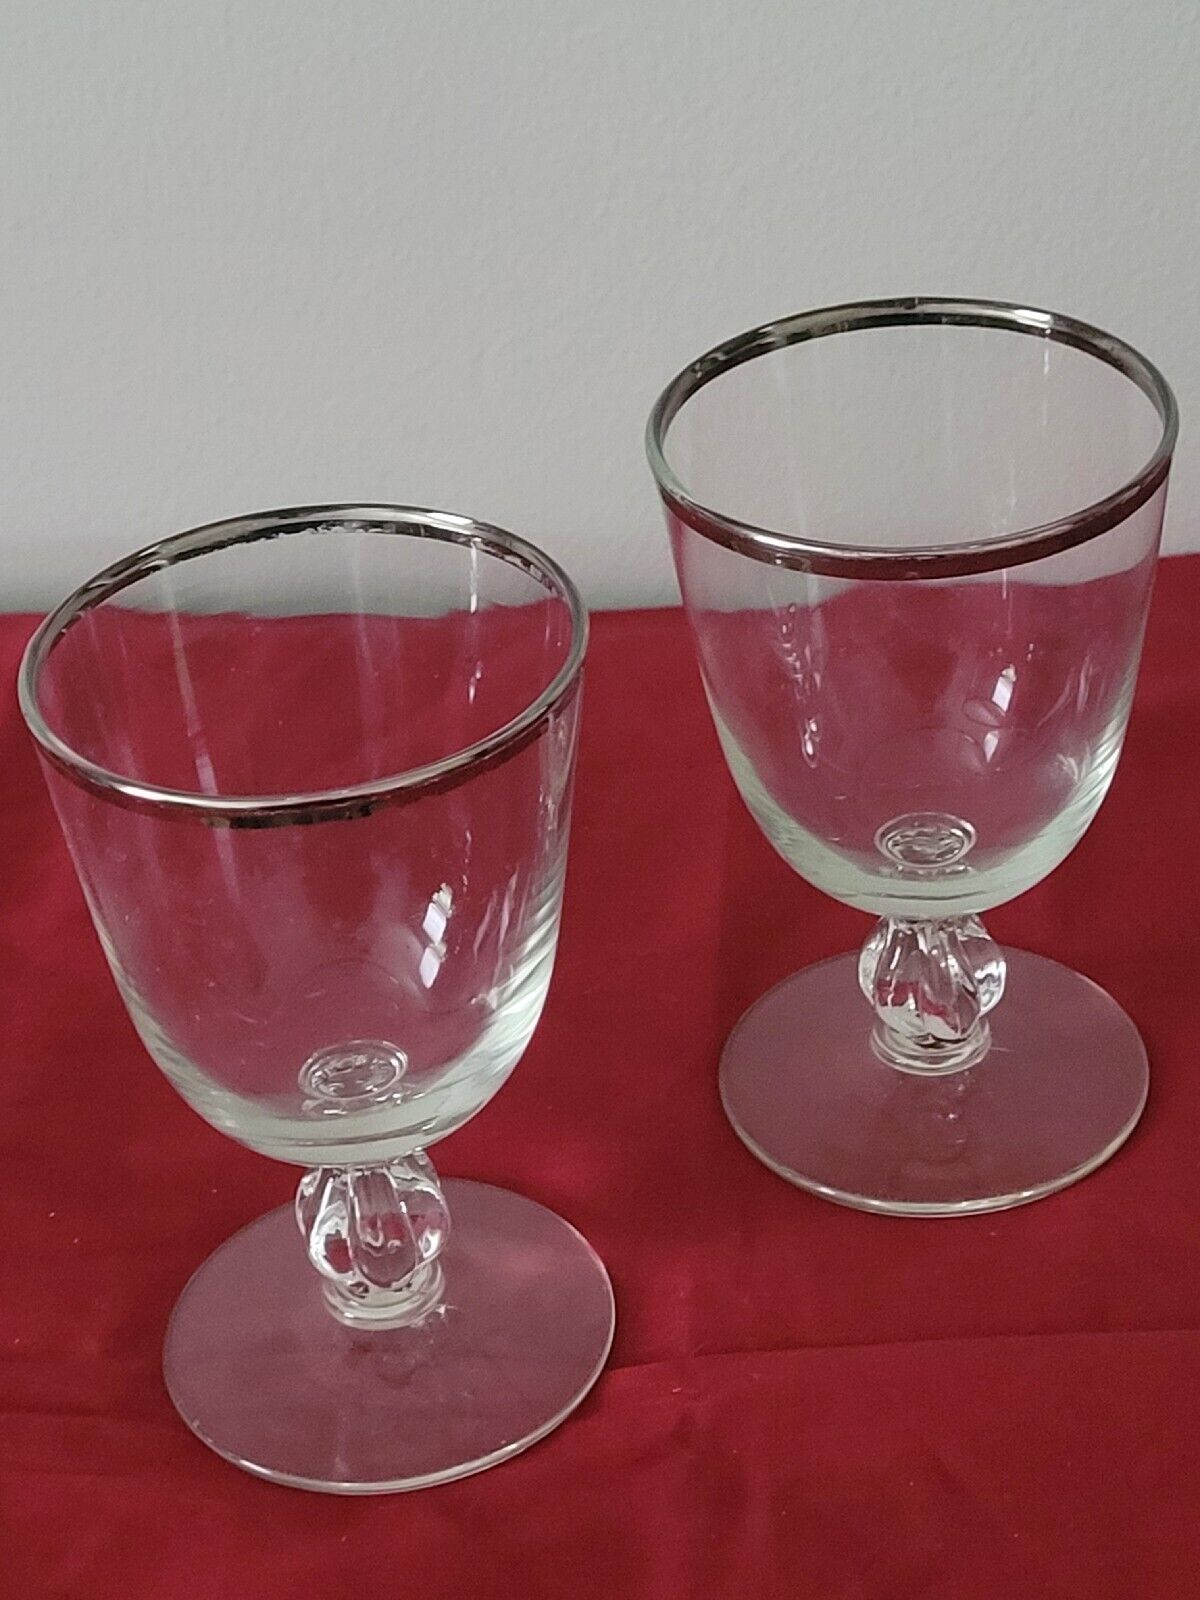 Primary image for Vintage Libbey Glass water glasses 3003-15 Set of 2 Platinum